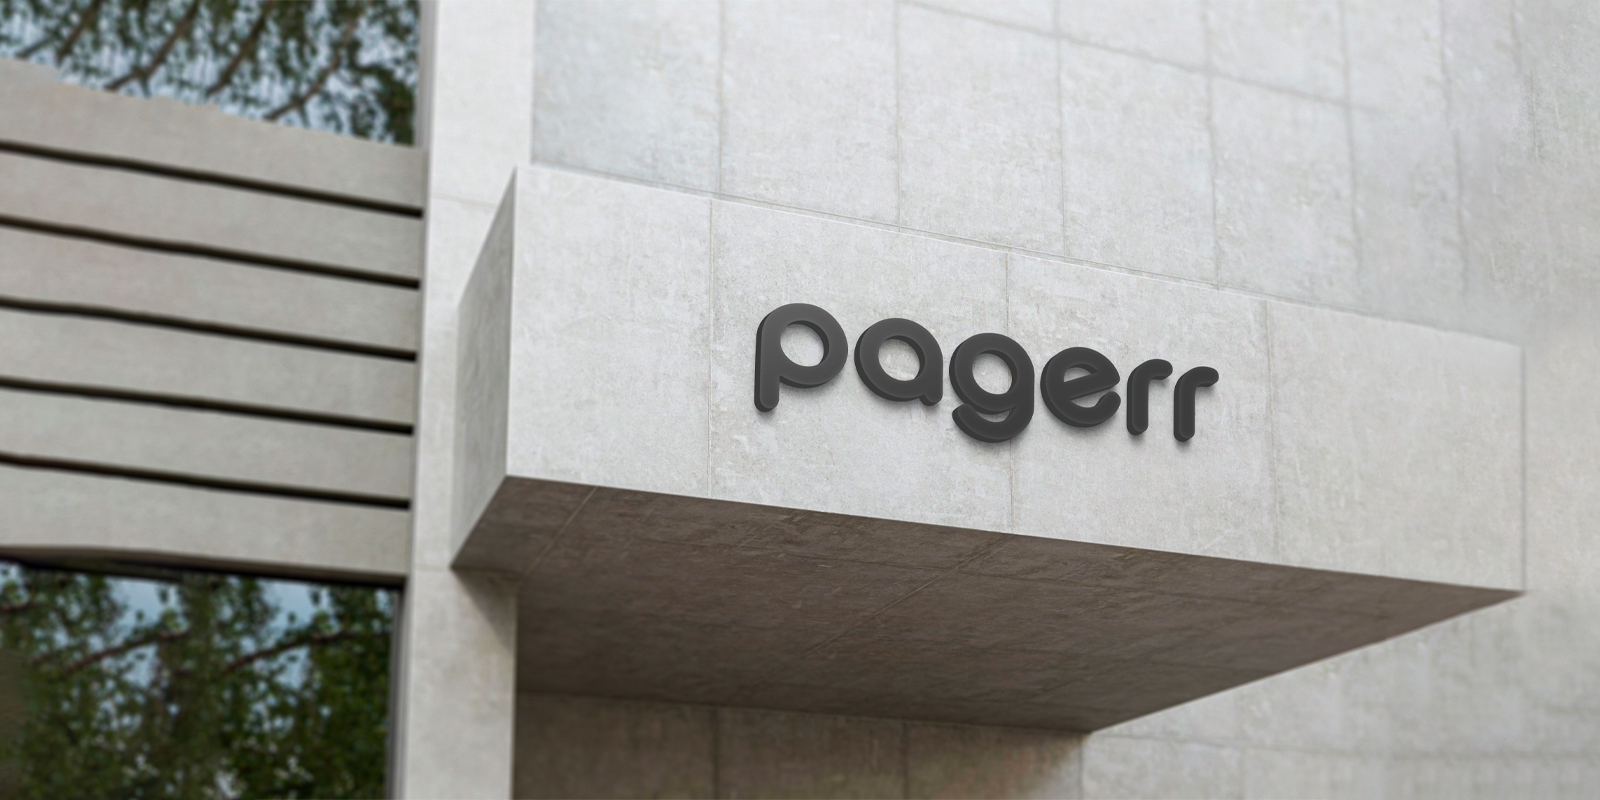 Logo signs in Tallinn - Print with Pagerr